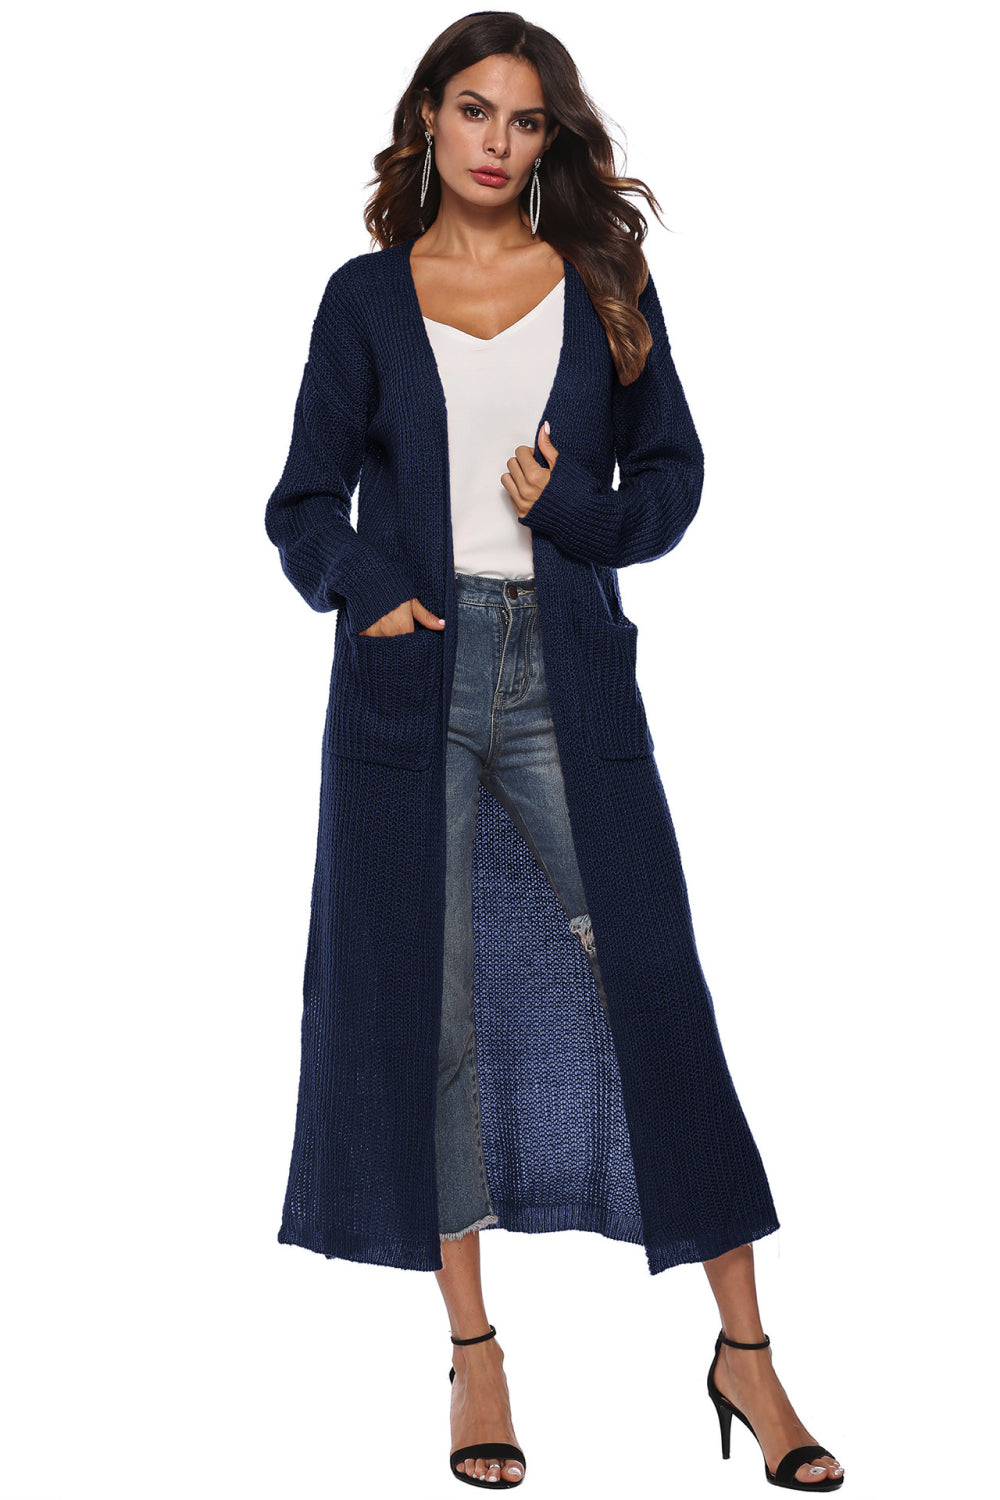 Long Sleeve Open Front Buttoned Cardigan - Women’s Clothing & Accessories - Shirts & Tops - 4 - 2024